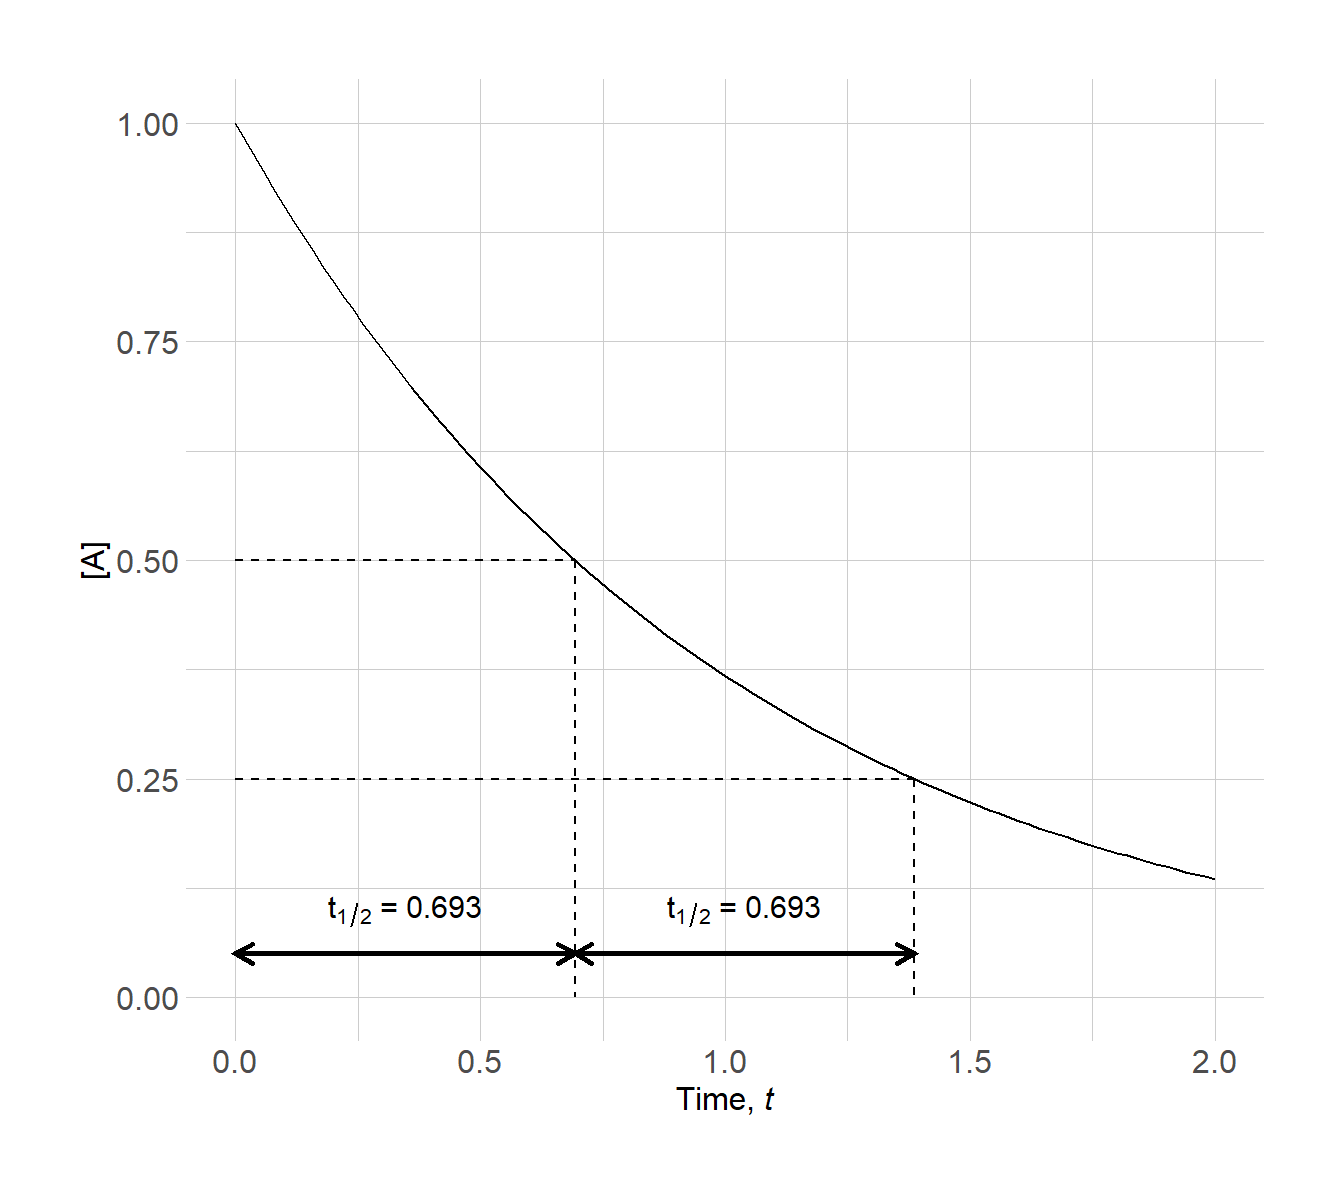 Half-life plot for a first-order reaction